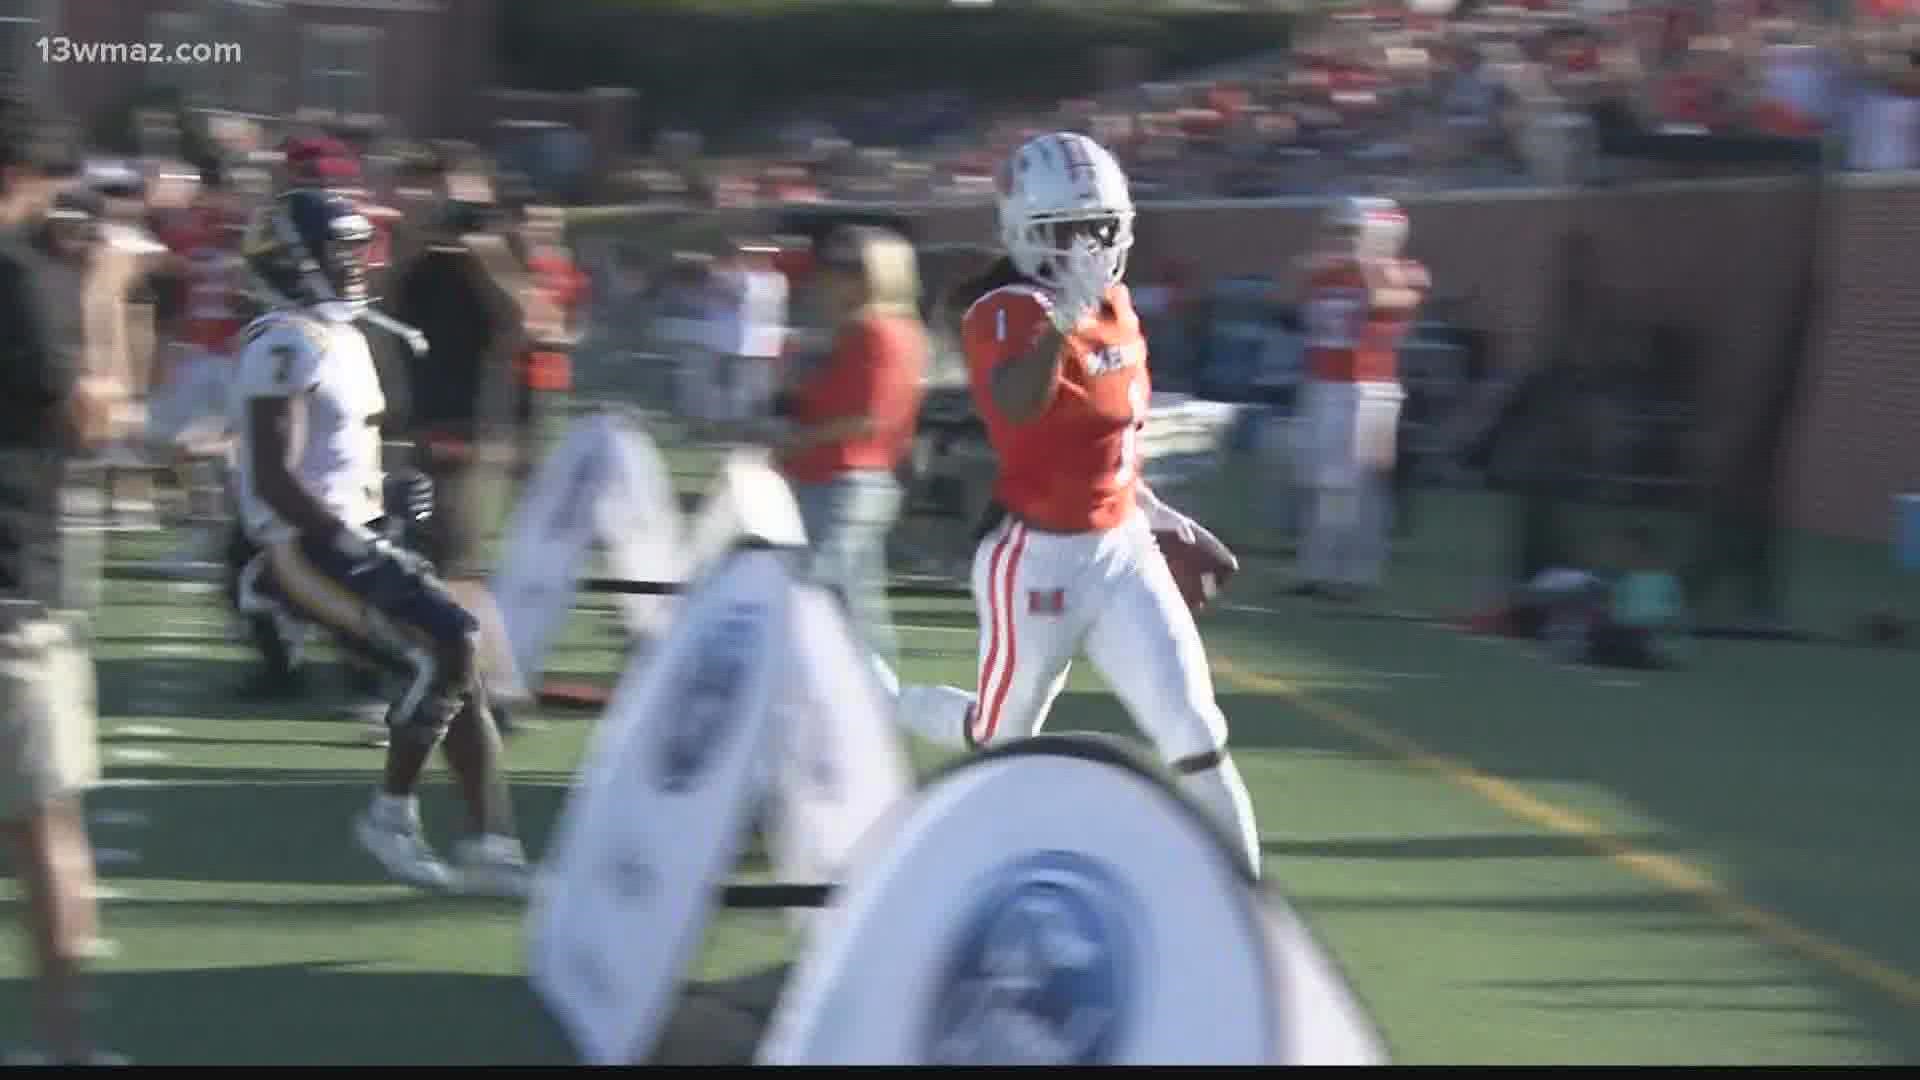 Number 11 ranked Mercer Football team now ready for its biggest game in some time, heading to Chattanooga this weekend to take on the number 9 ranked Mocs.